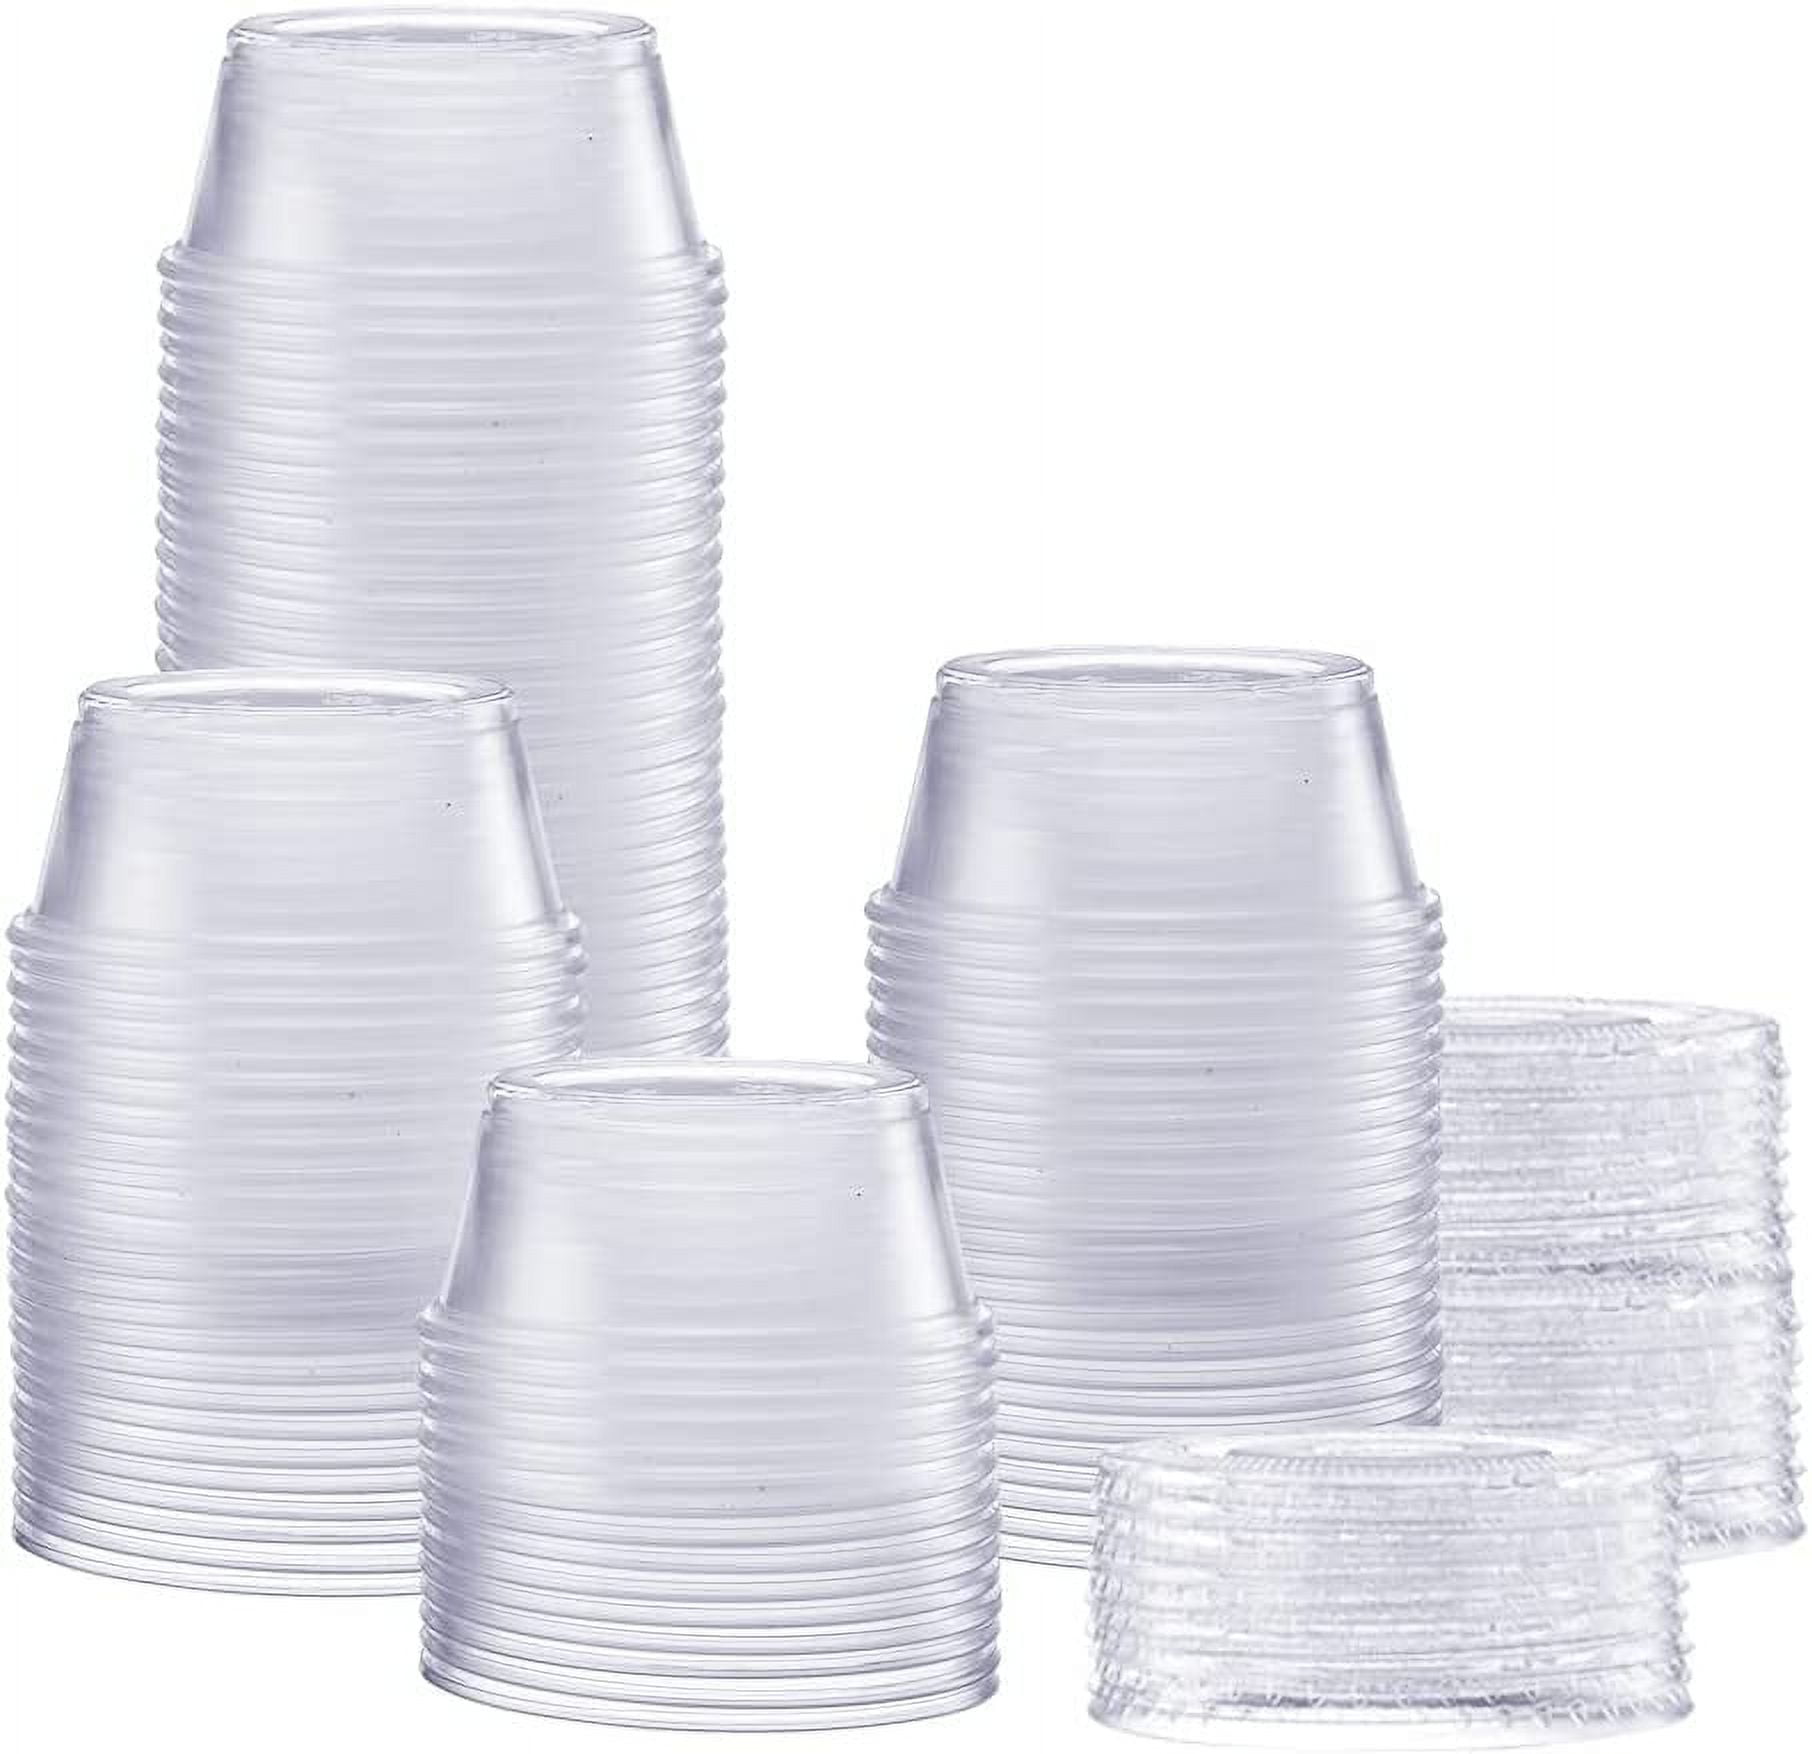 Comfy Package Small Plastic Cups with Lids Portion Cups & Dessert Cups, 4oz  100-Pack